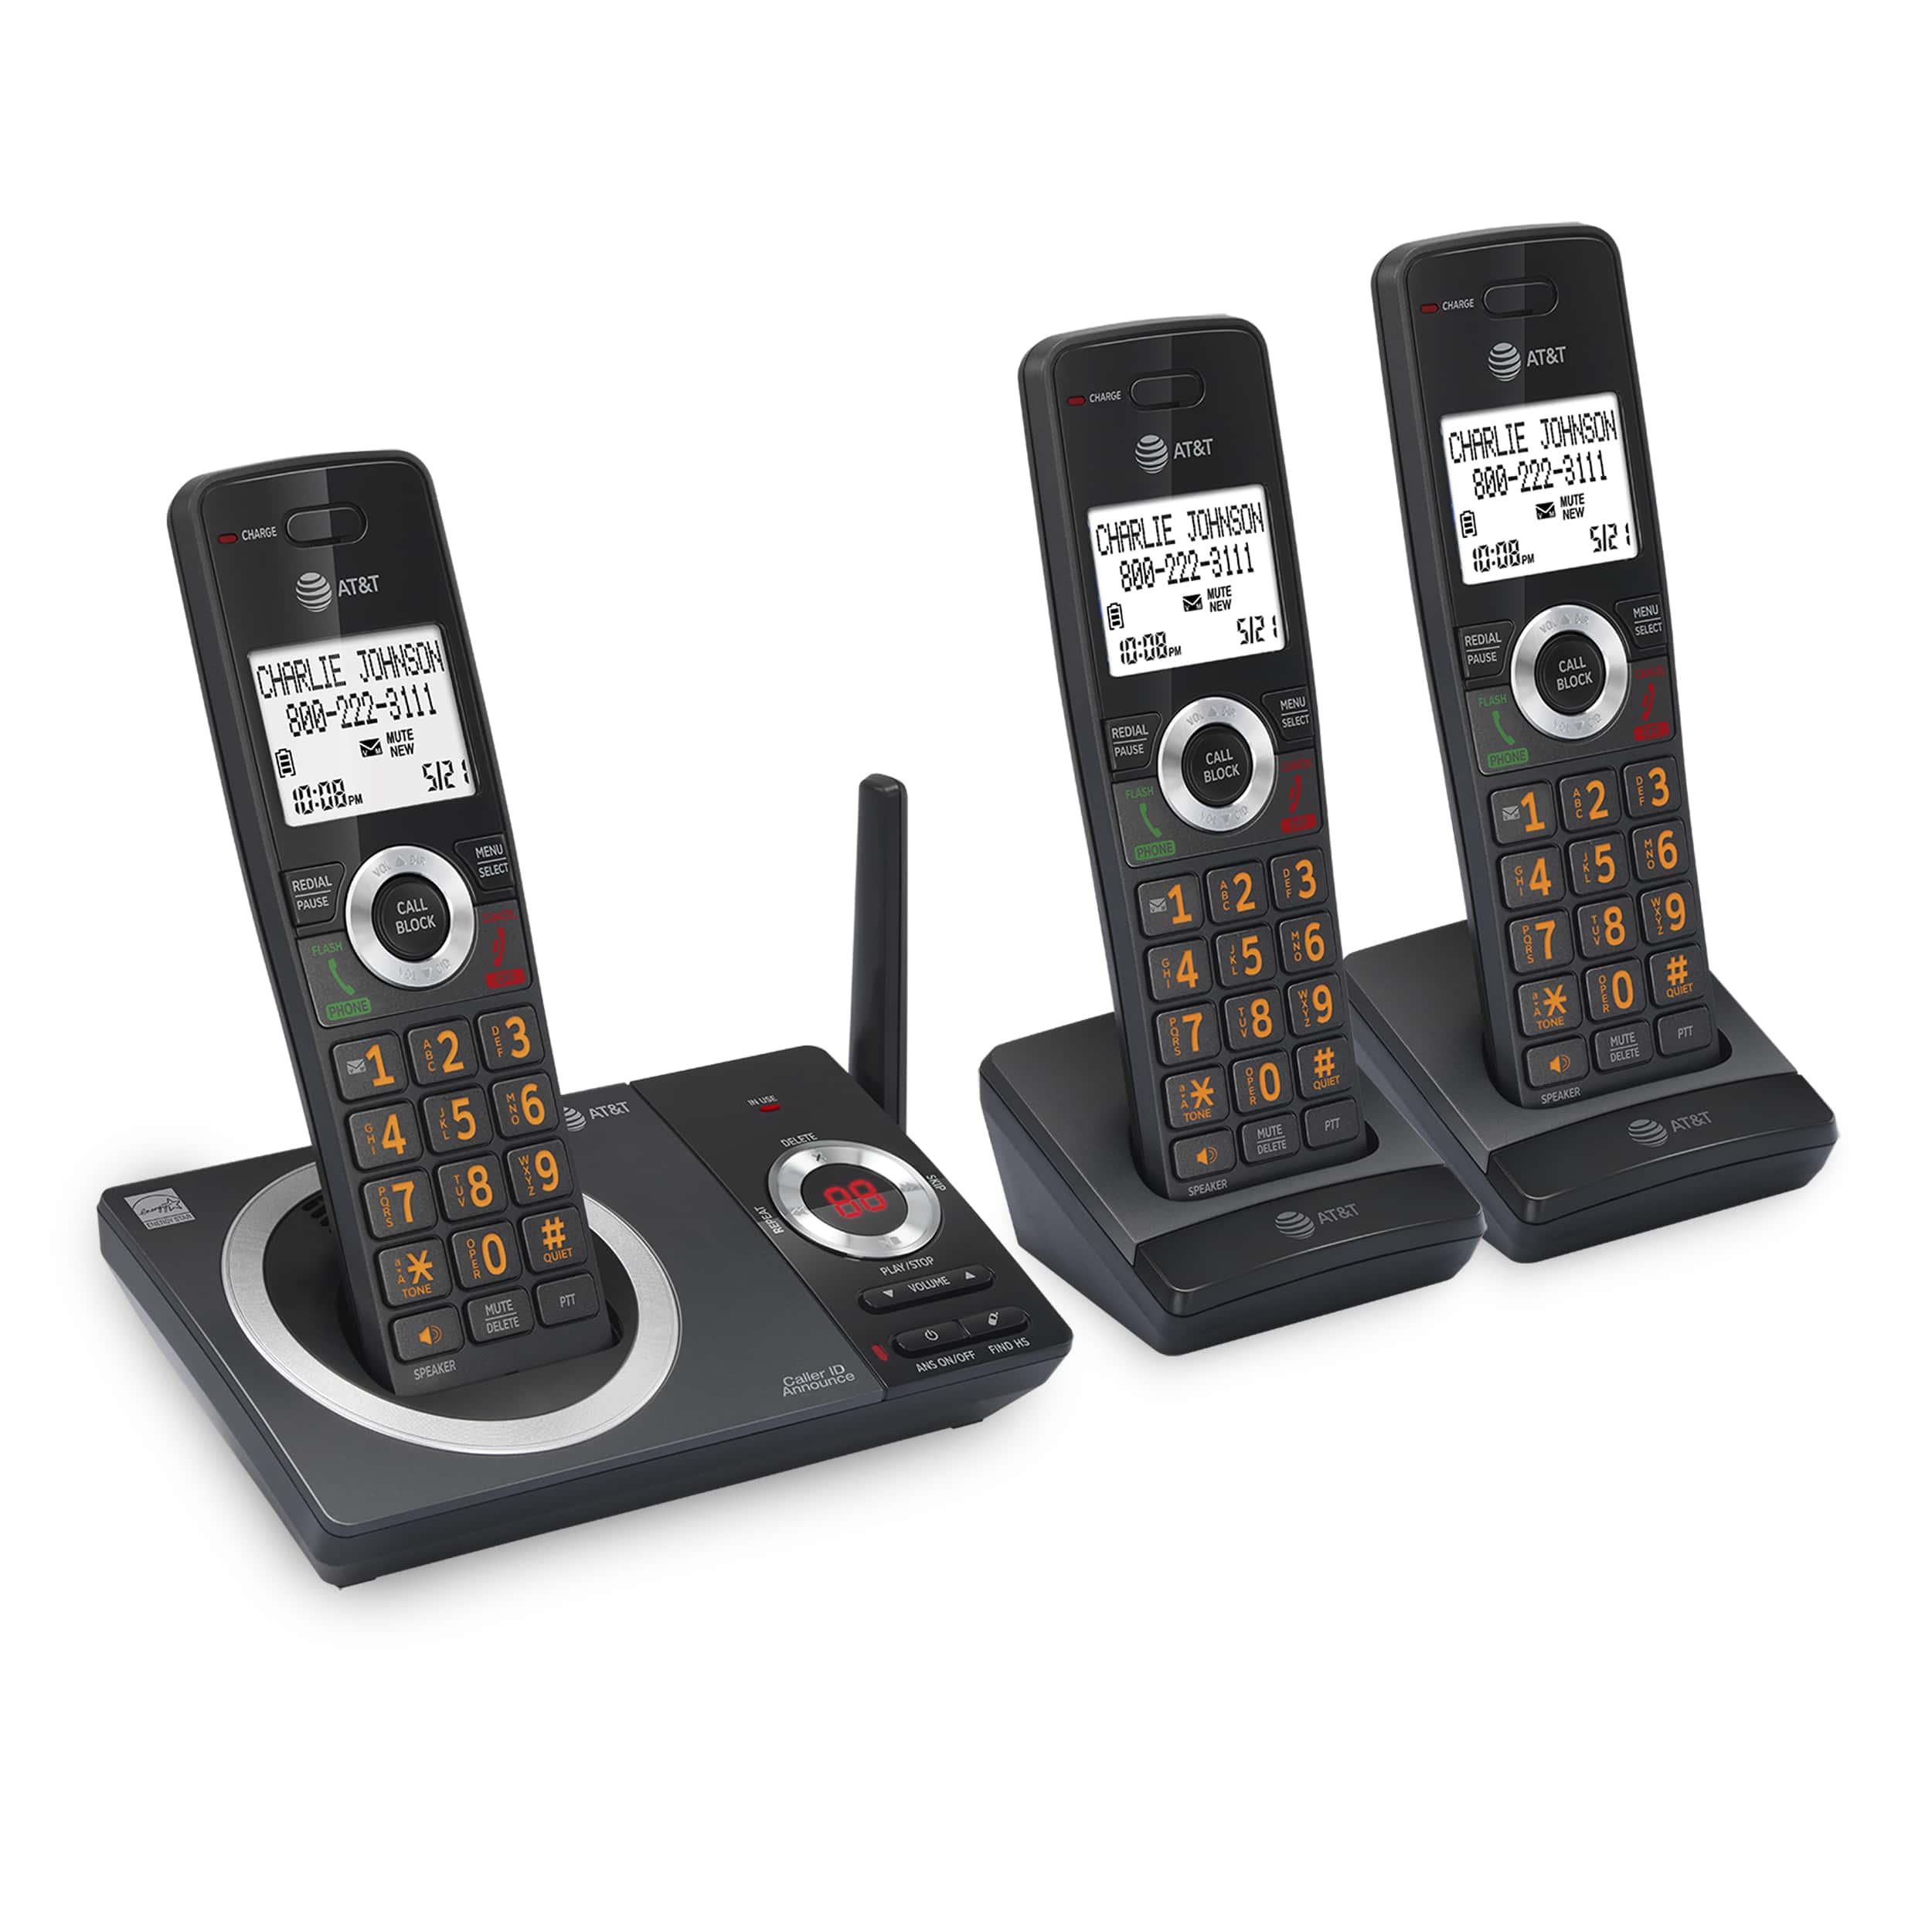 3-Handset Expandable Cordless Phone with Unsurpassed Range, Smart Call Blocker and Answering System - view 2